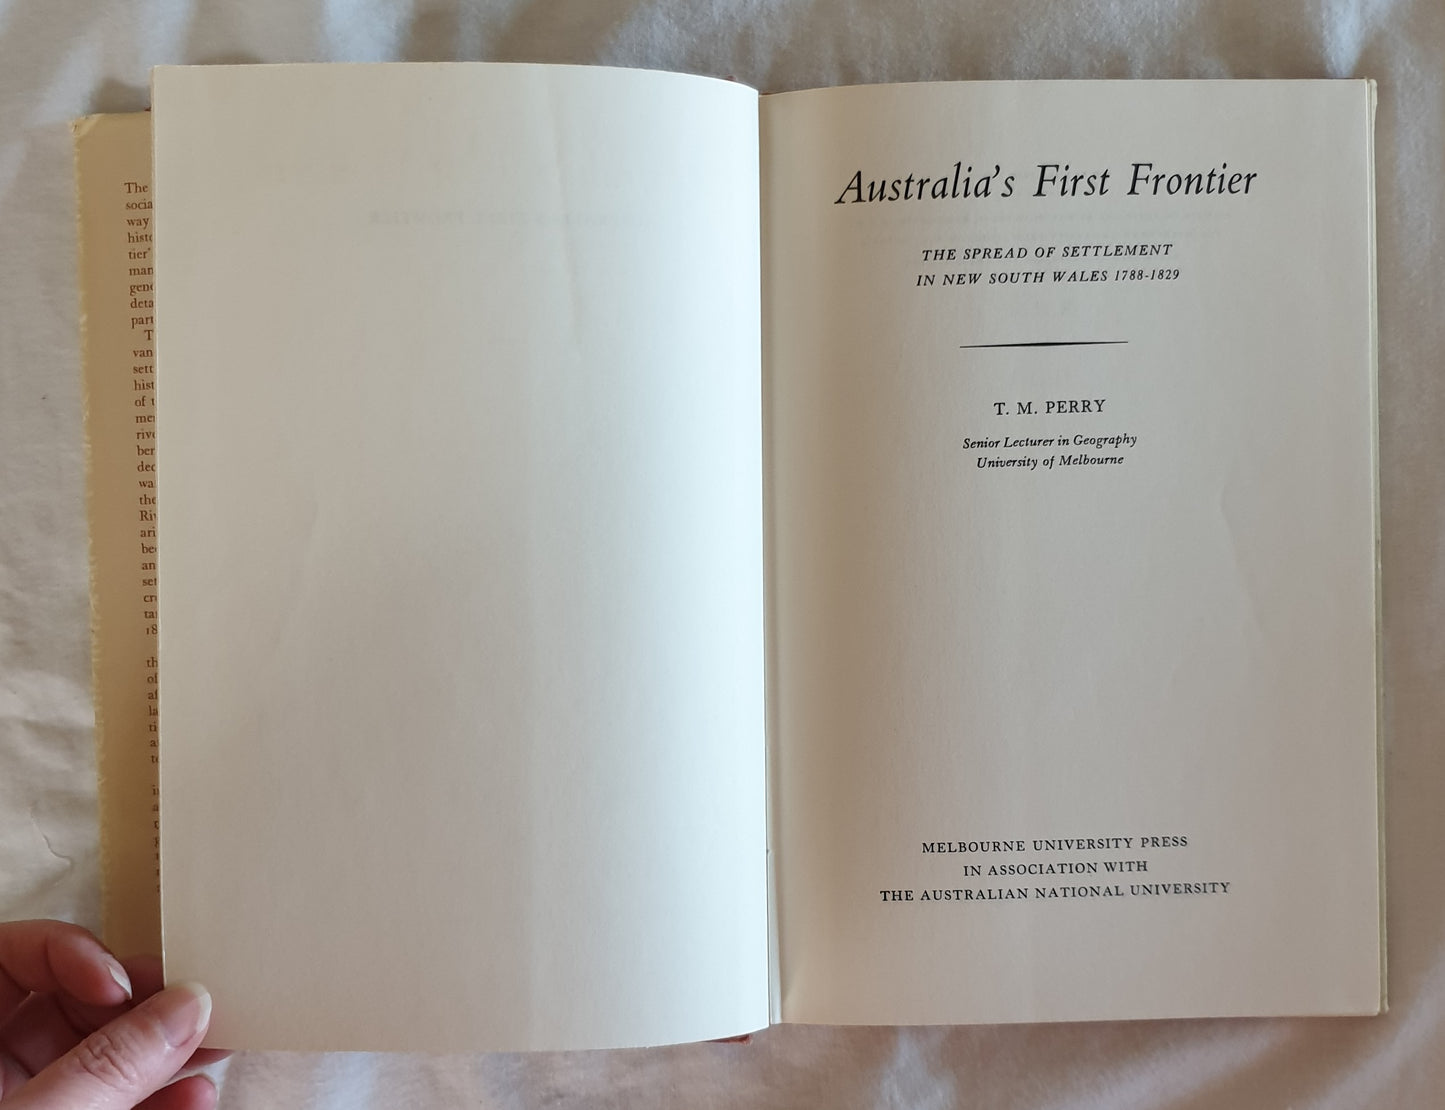 Australia's First Frontier by T. M. Perry